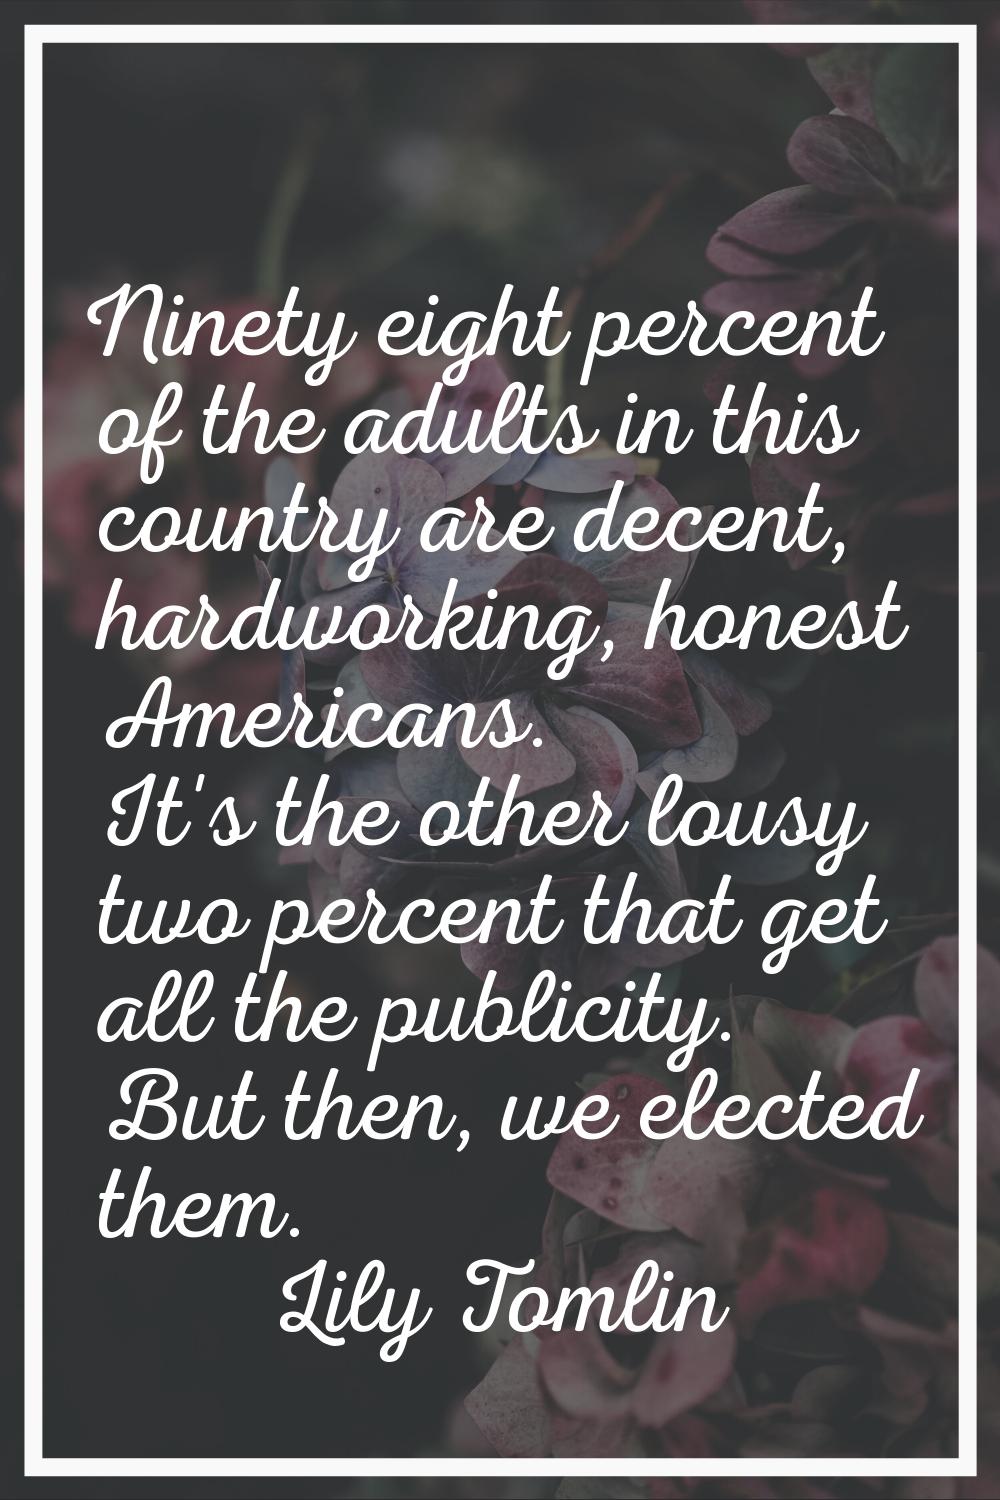 Ninety eight percent of the adults in this country are decent, hardworking, honest Americans. It's 